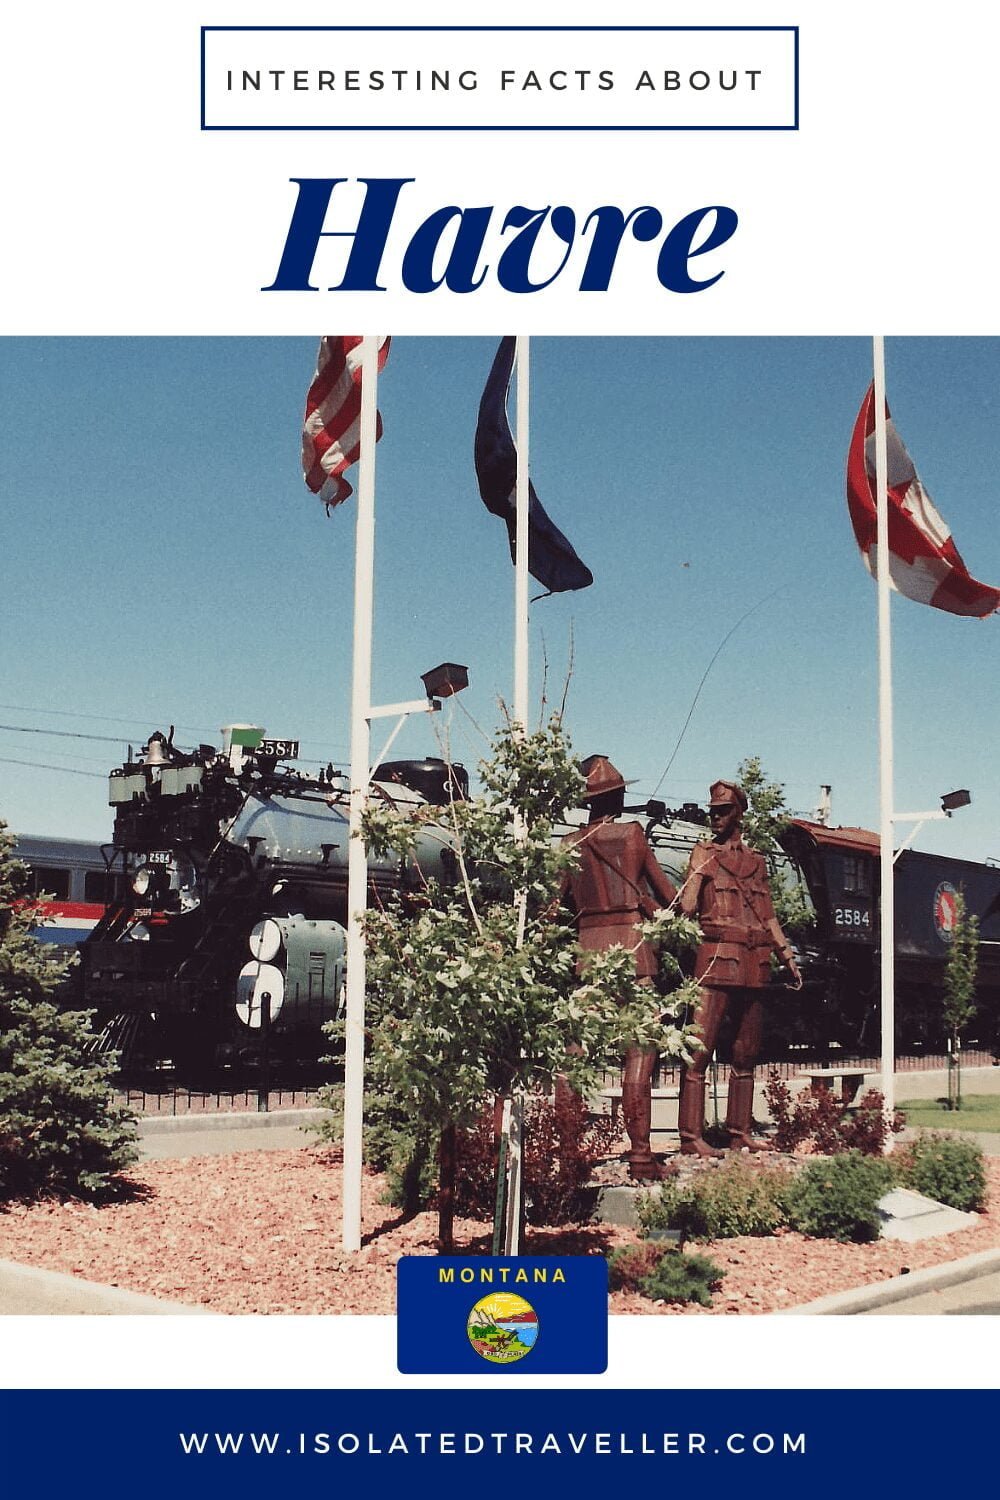 Facts About Havre, Montana